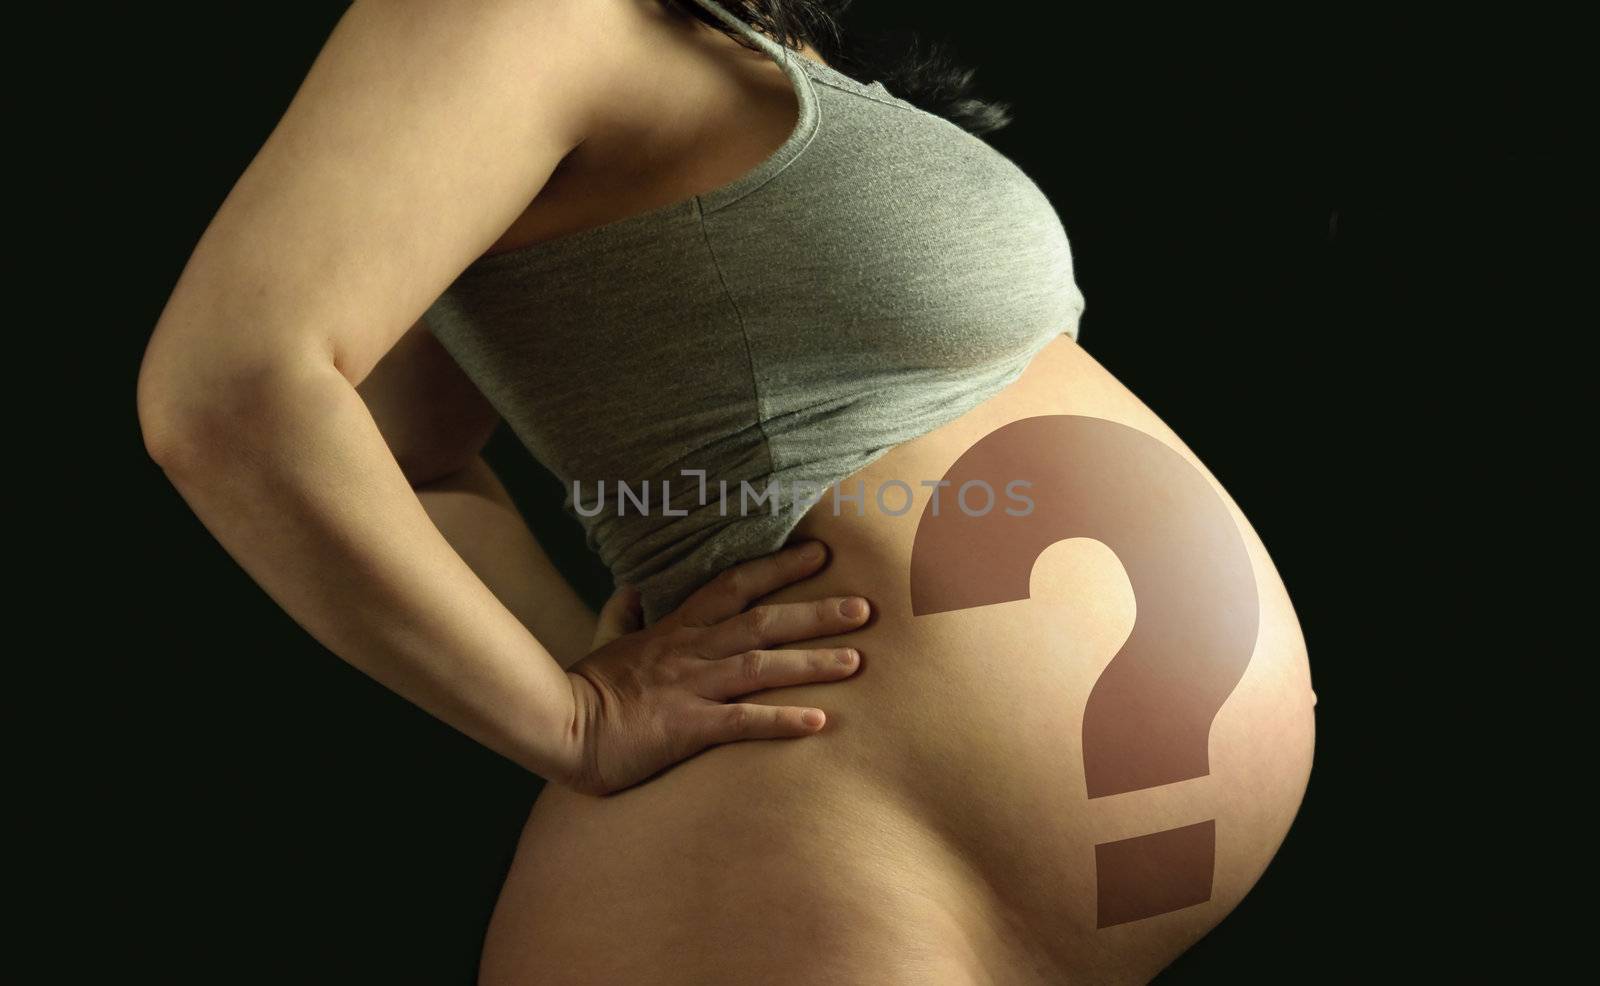 Picture of a pregnant.